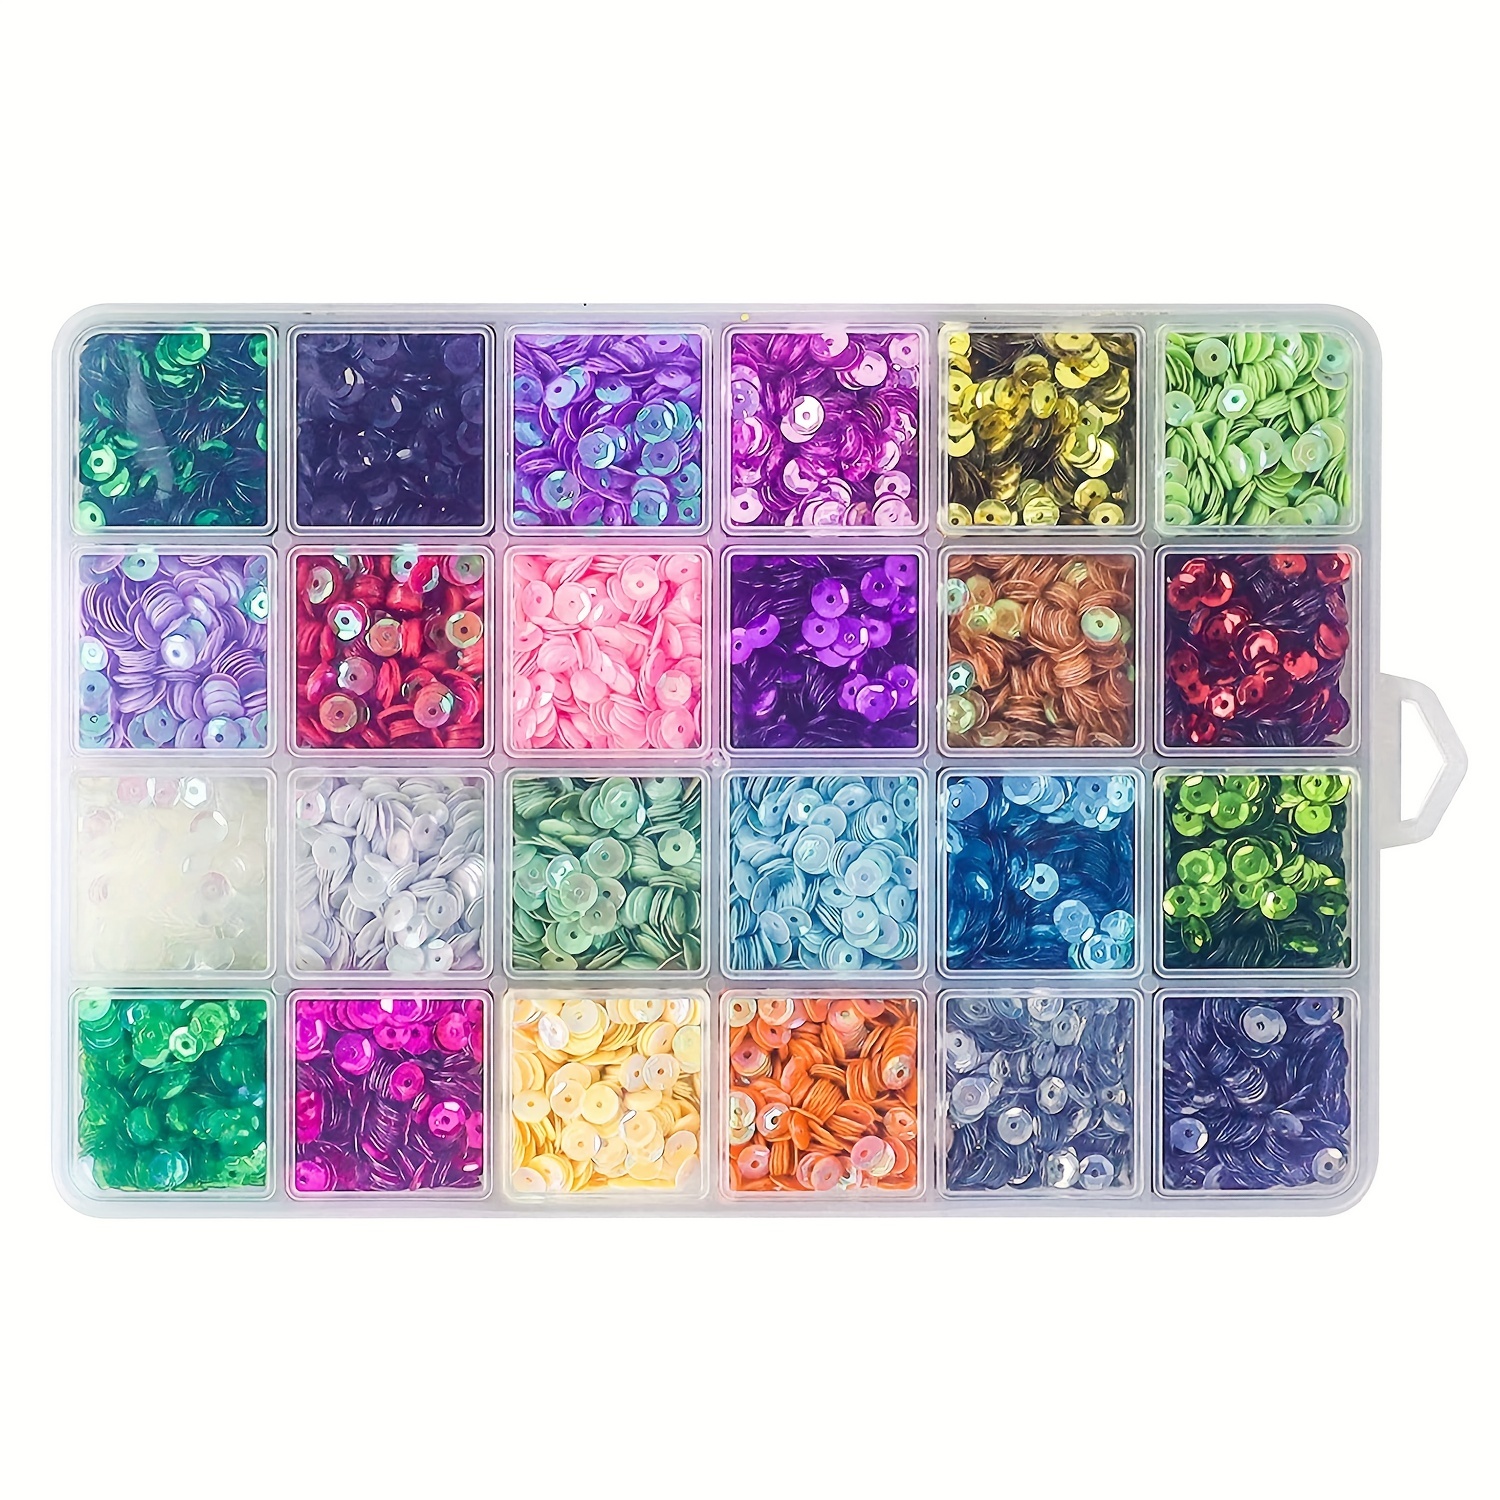 

24pcs Colorful Loose Sequins Cup Set With Box For Sewing Sticking Threading Crafts Christmas Balls Easter Decoration Diy Jewelry Making Supplies